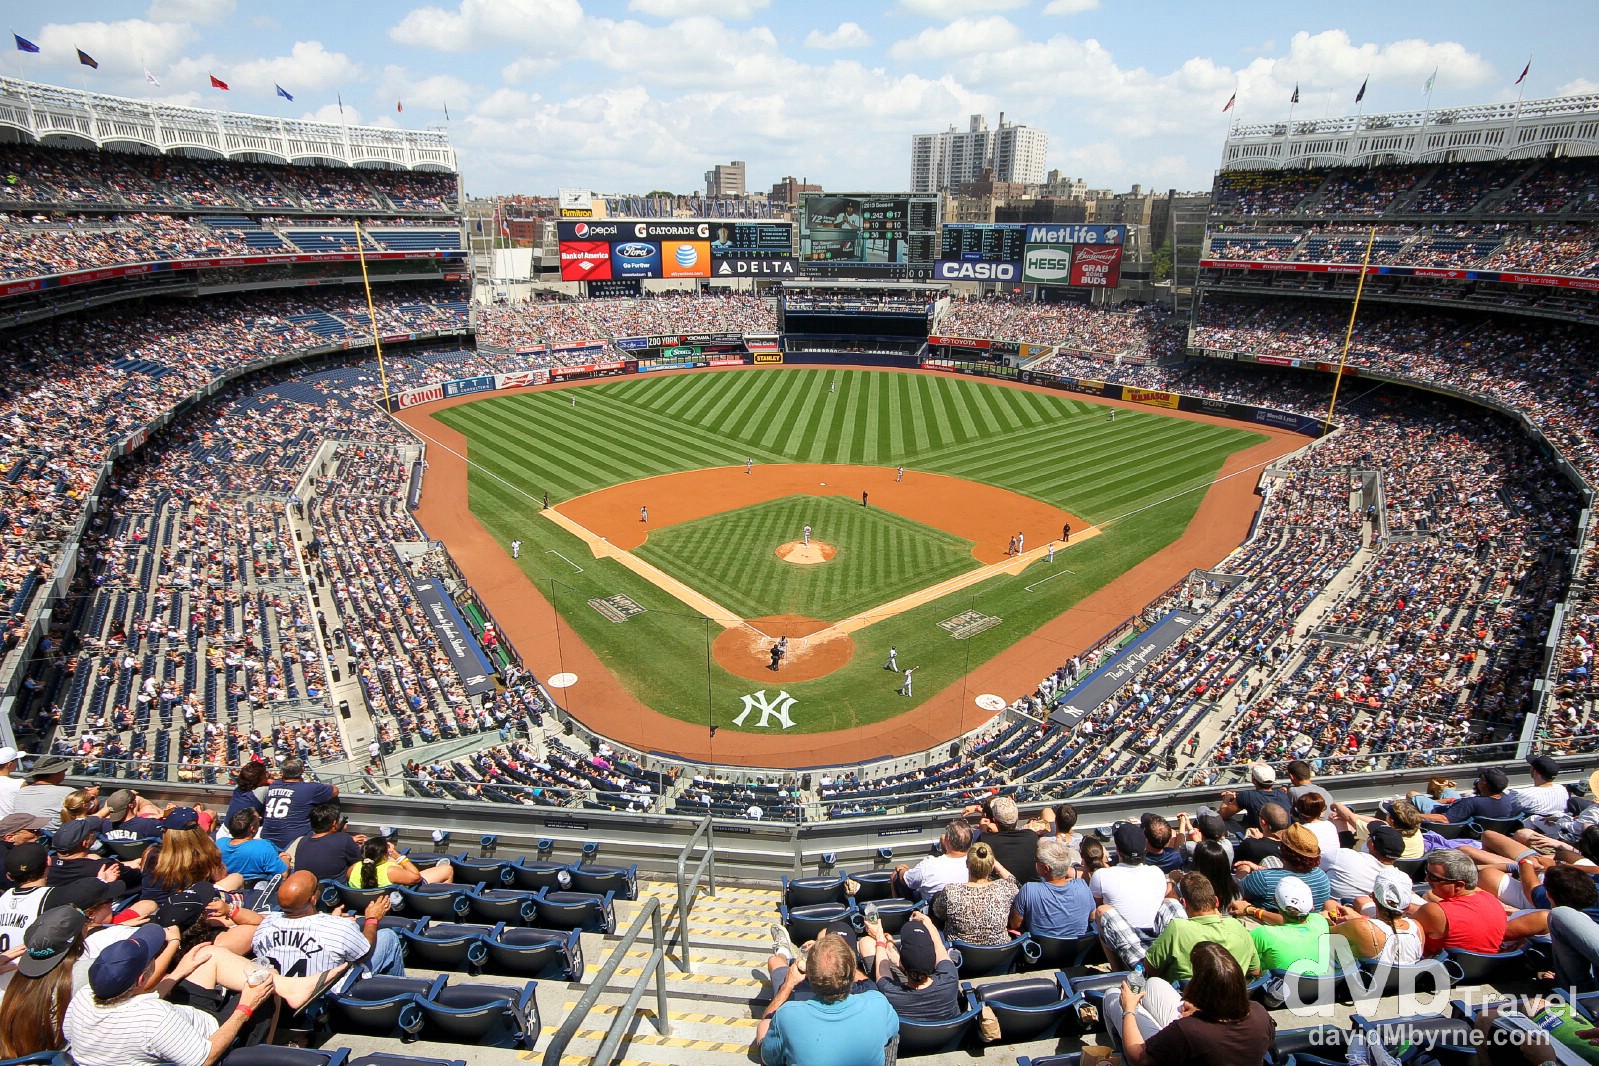 A sunny Sunday afternoon in Yankee Stadium, The Bronx, New York. July 14th 2013. 